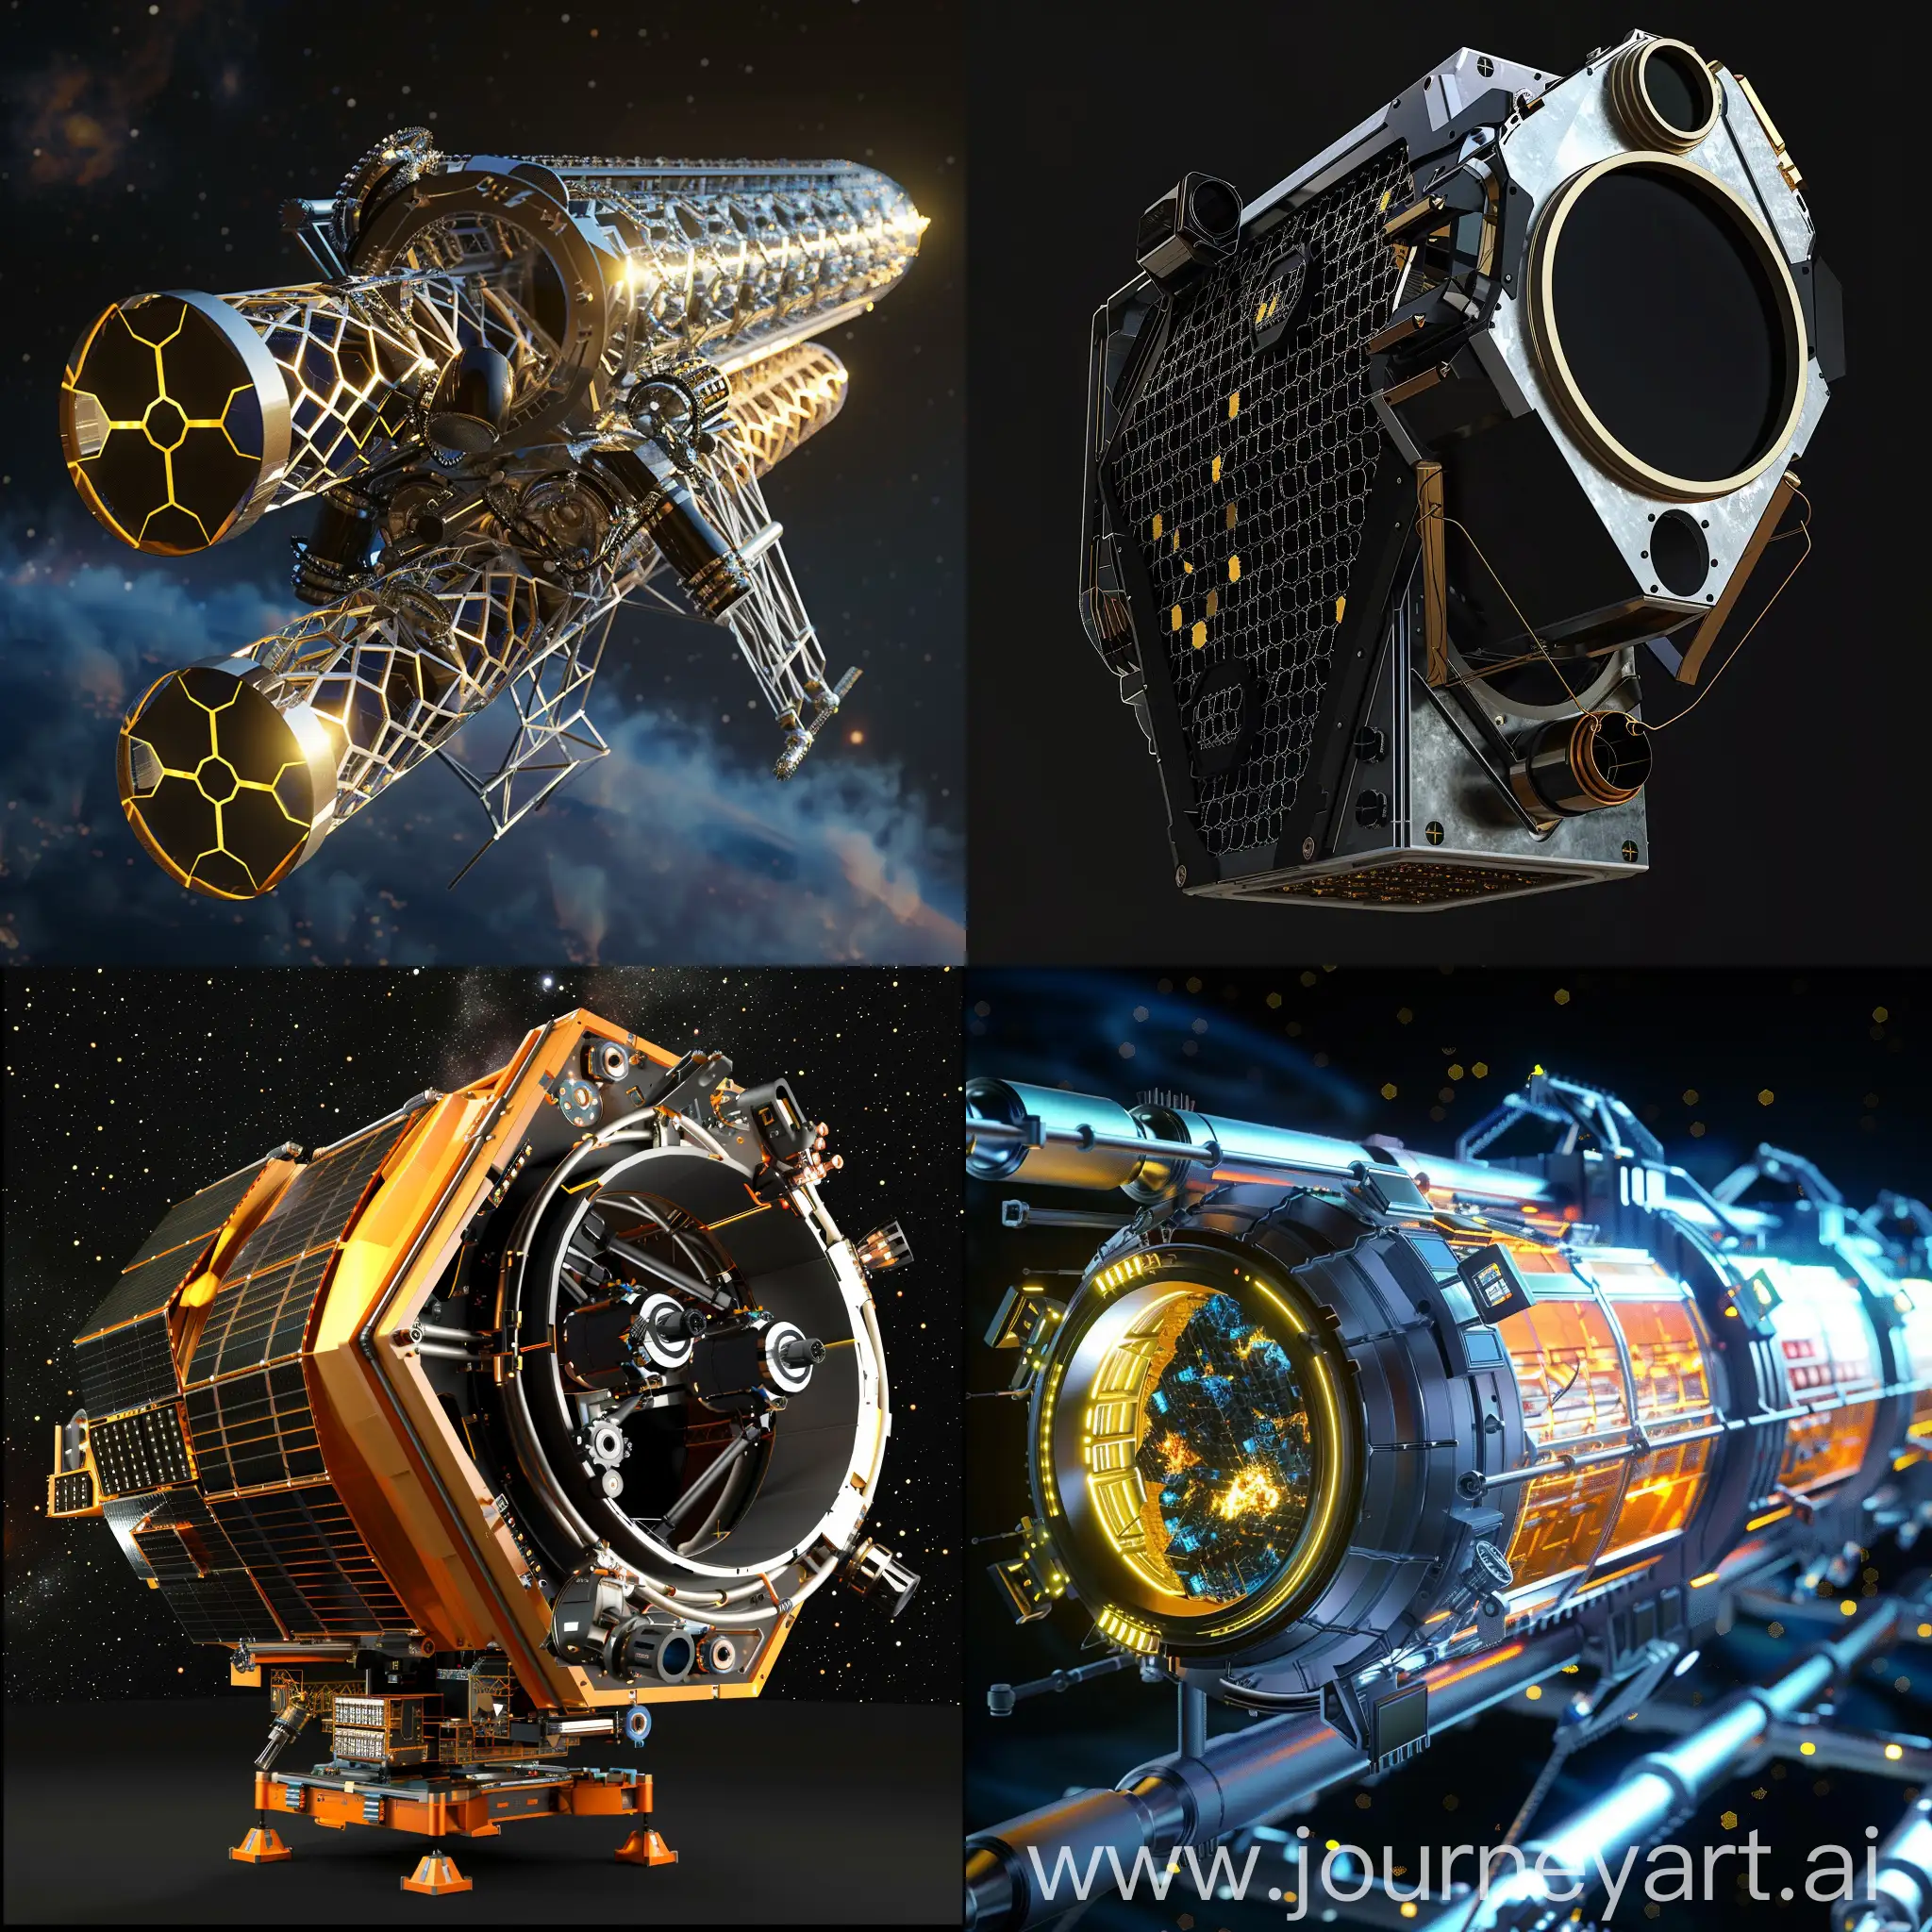 Futuristic-SciFi-Space-Telescope-with-Advanced-Technology-and-CuttingEdge-Features